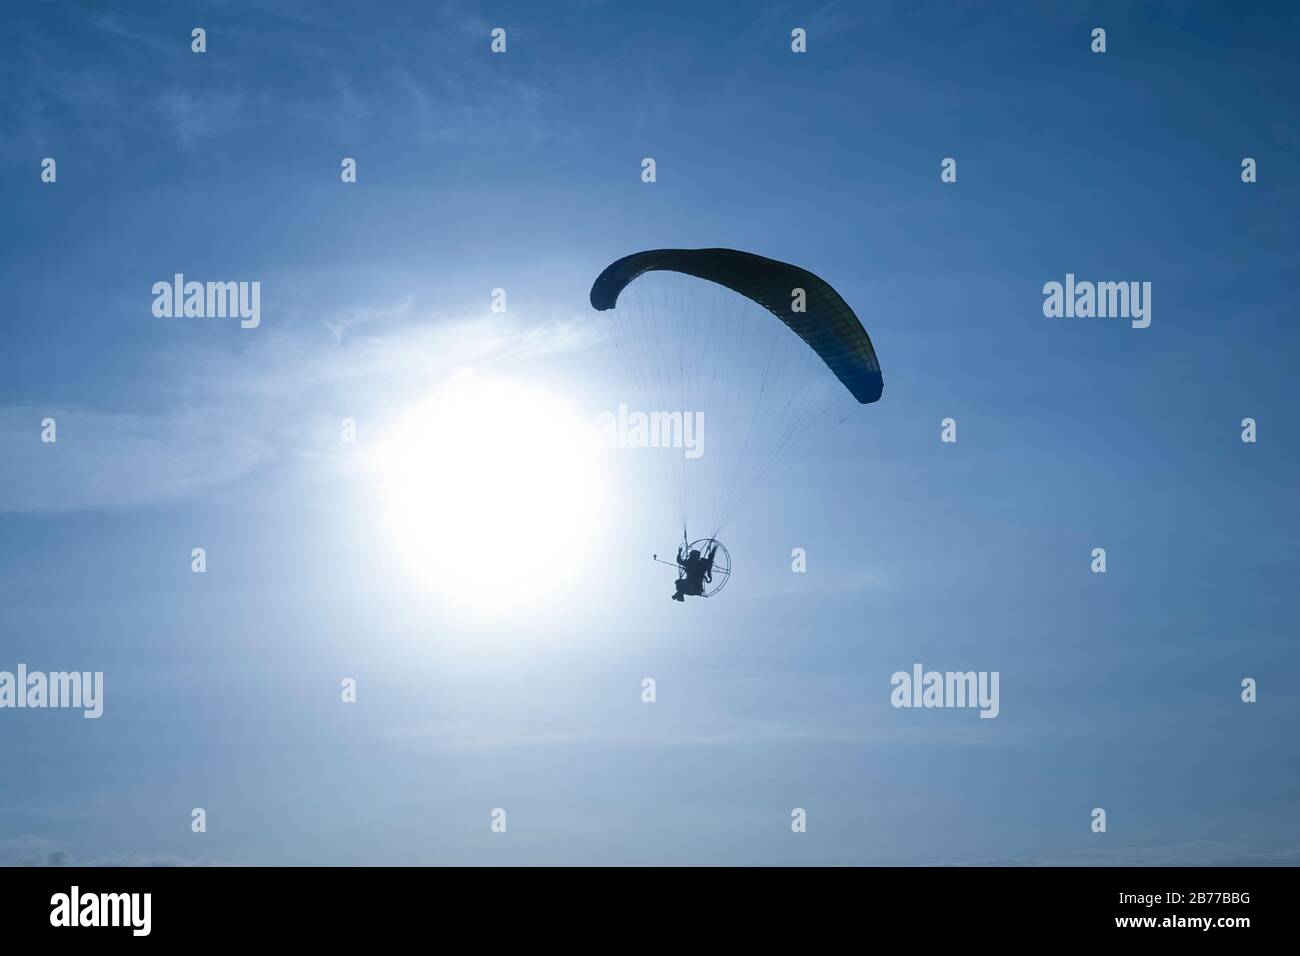 A hot air balloon festival features paragliders, hot air balloons and other forms of air transports. Stock Photo